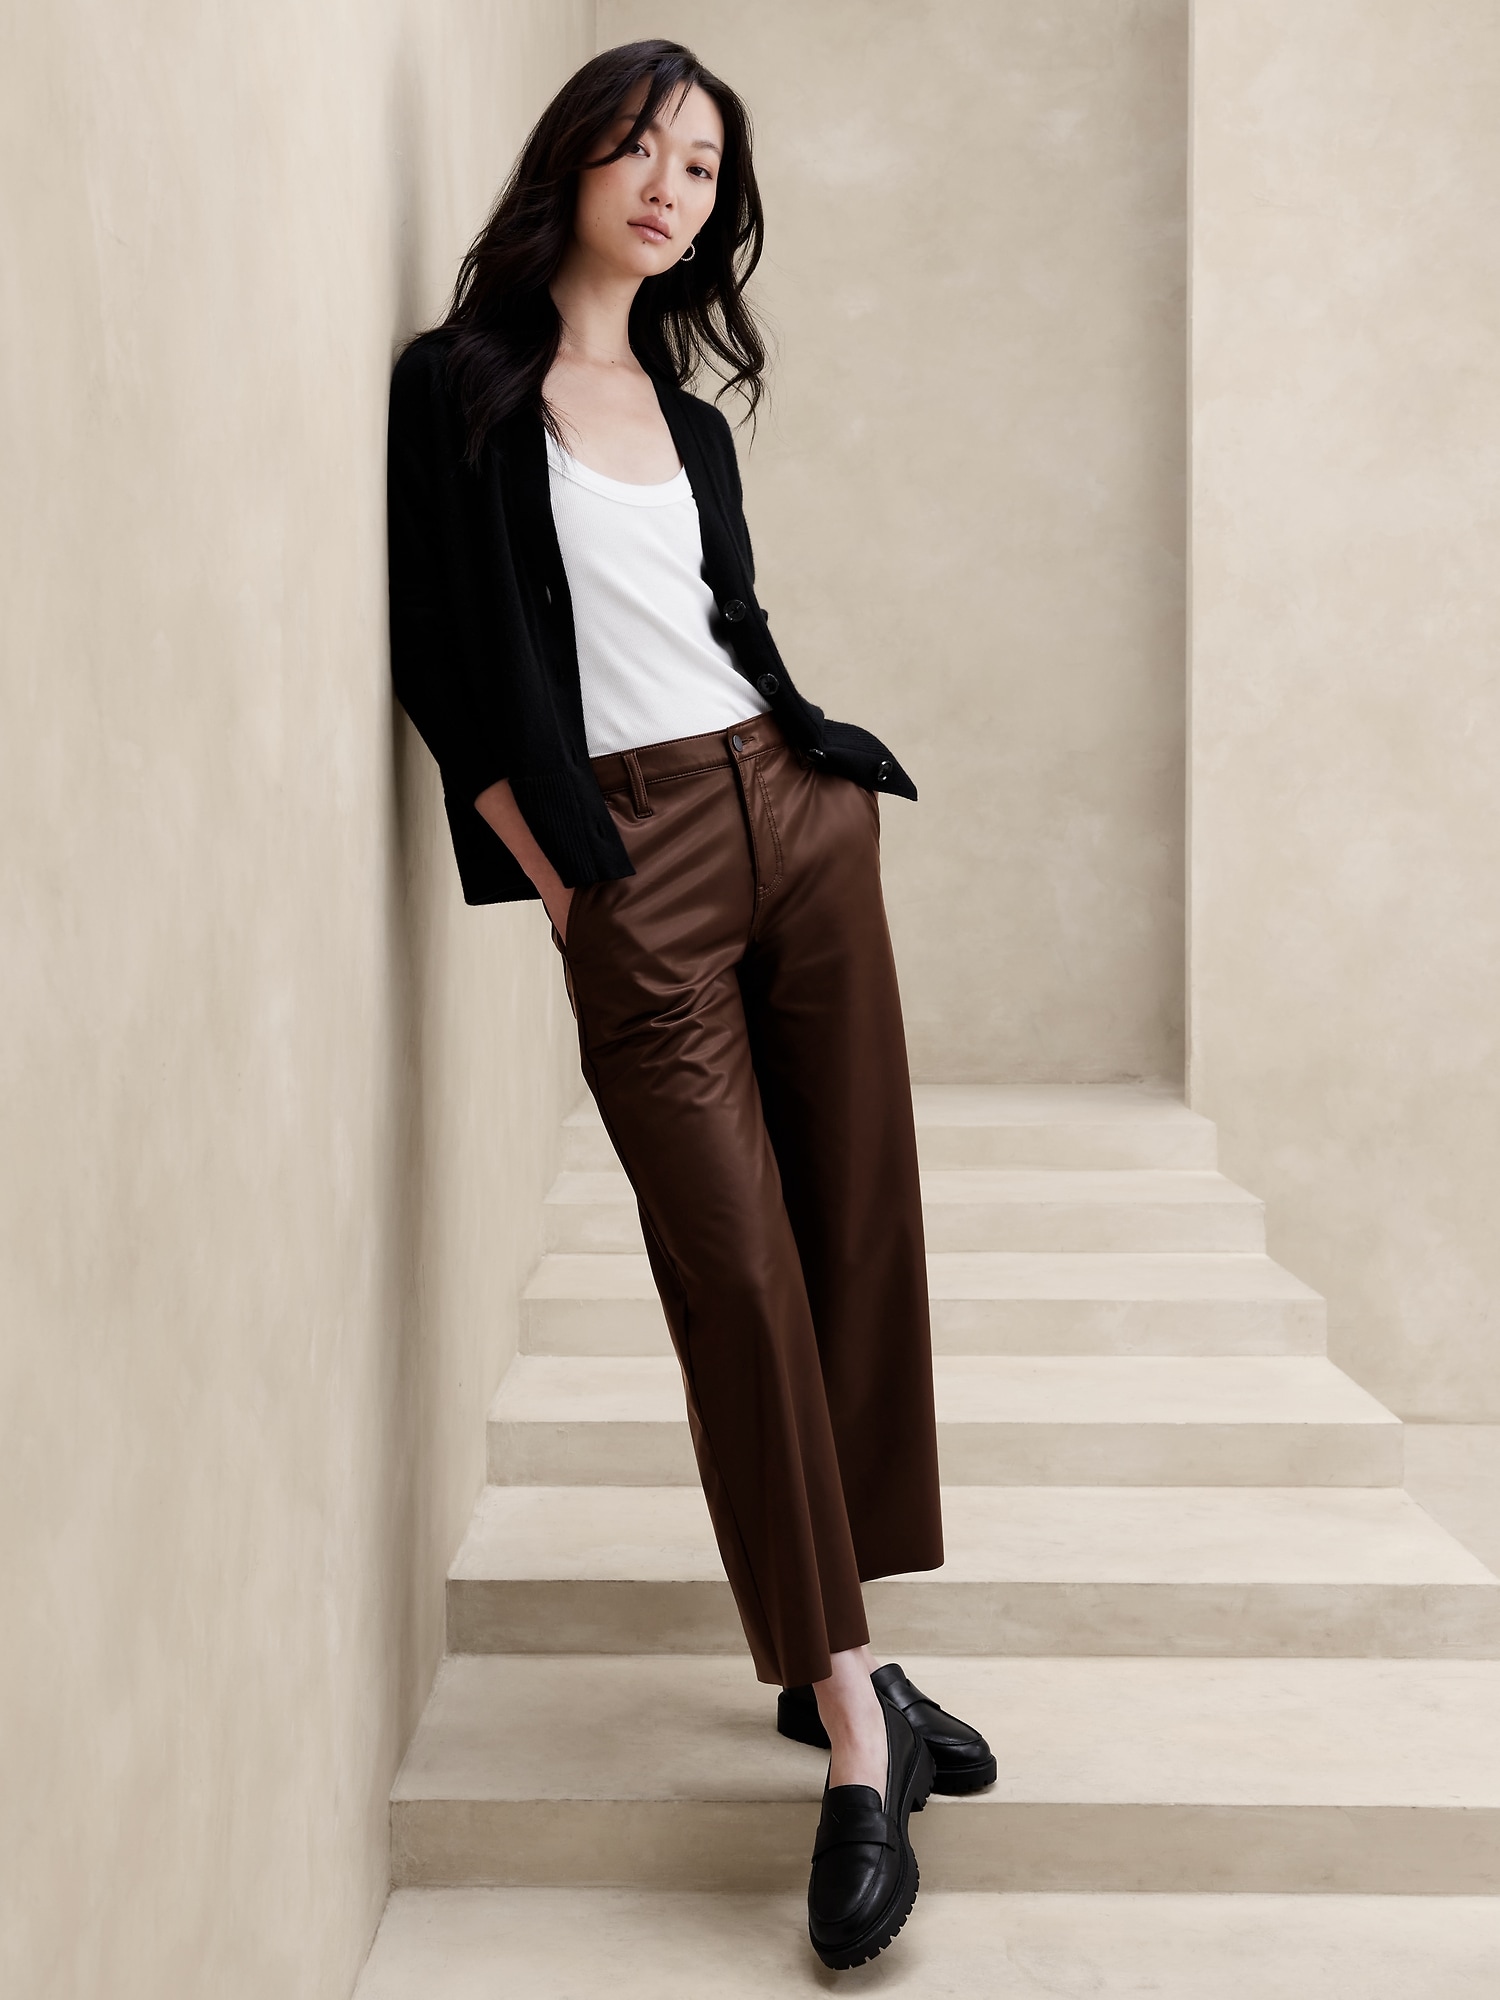 THE BEST FAUX LEATHER TROUSERS/PANTS OUT RIGHT NOW – Crystal Momon